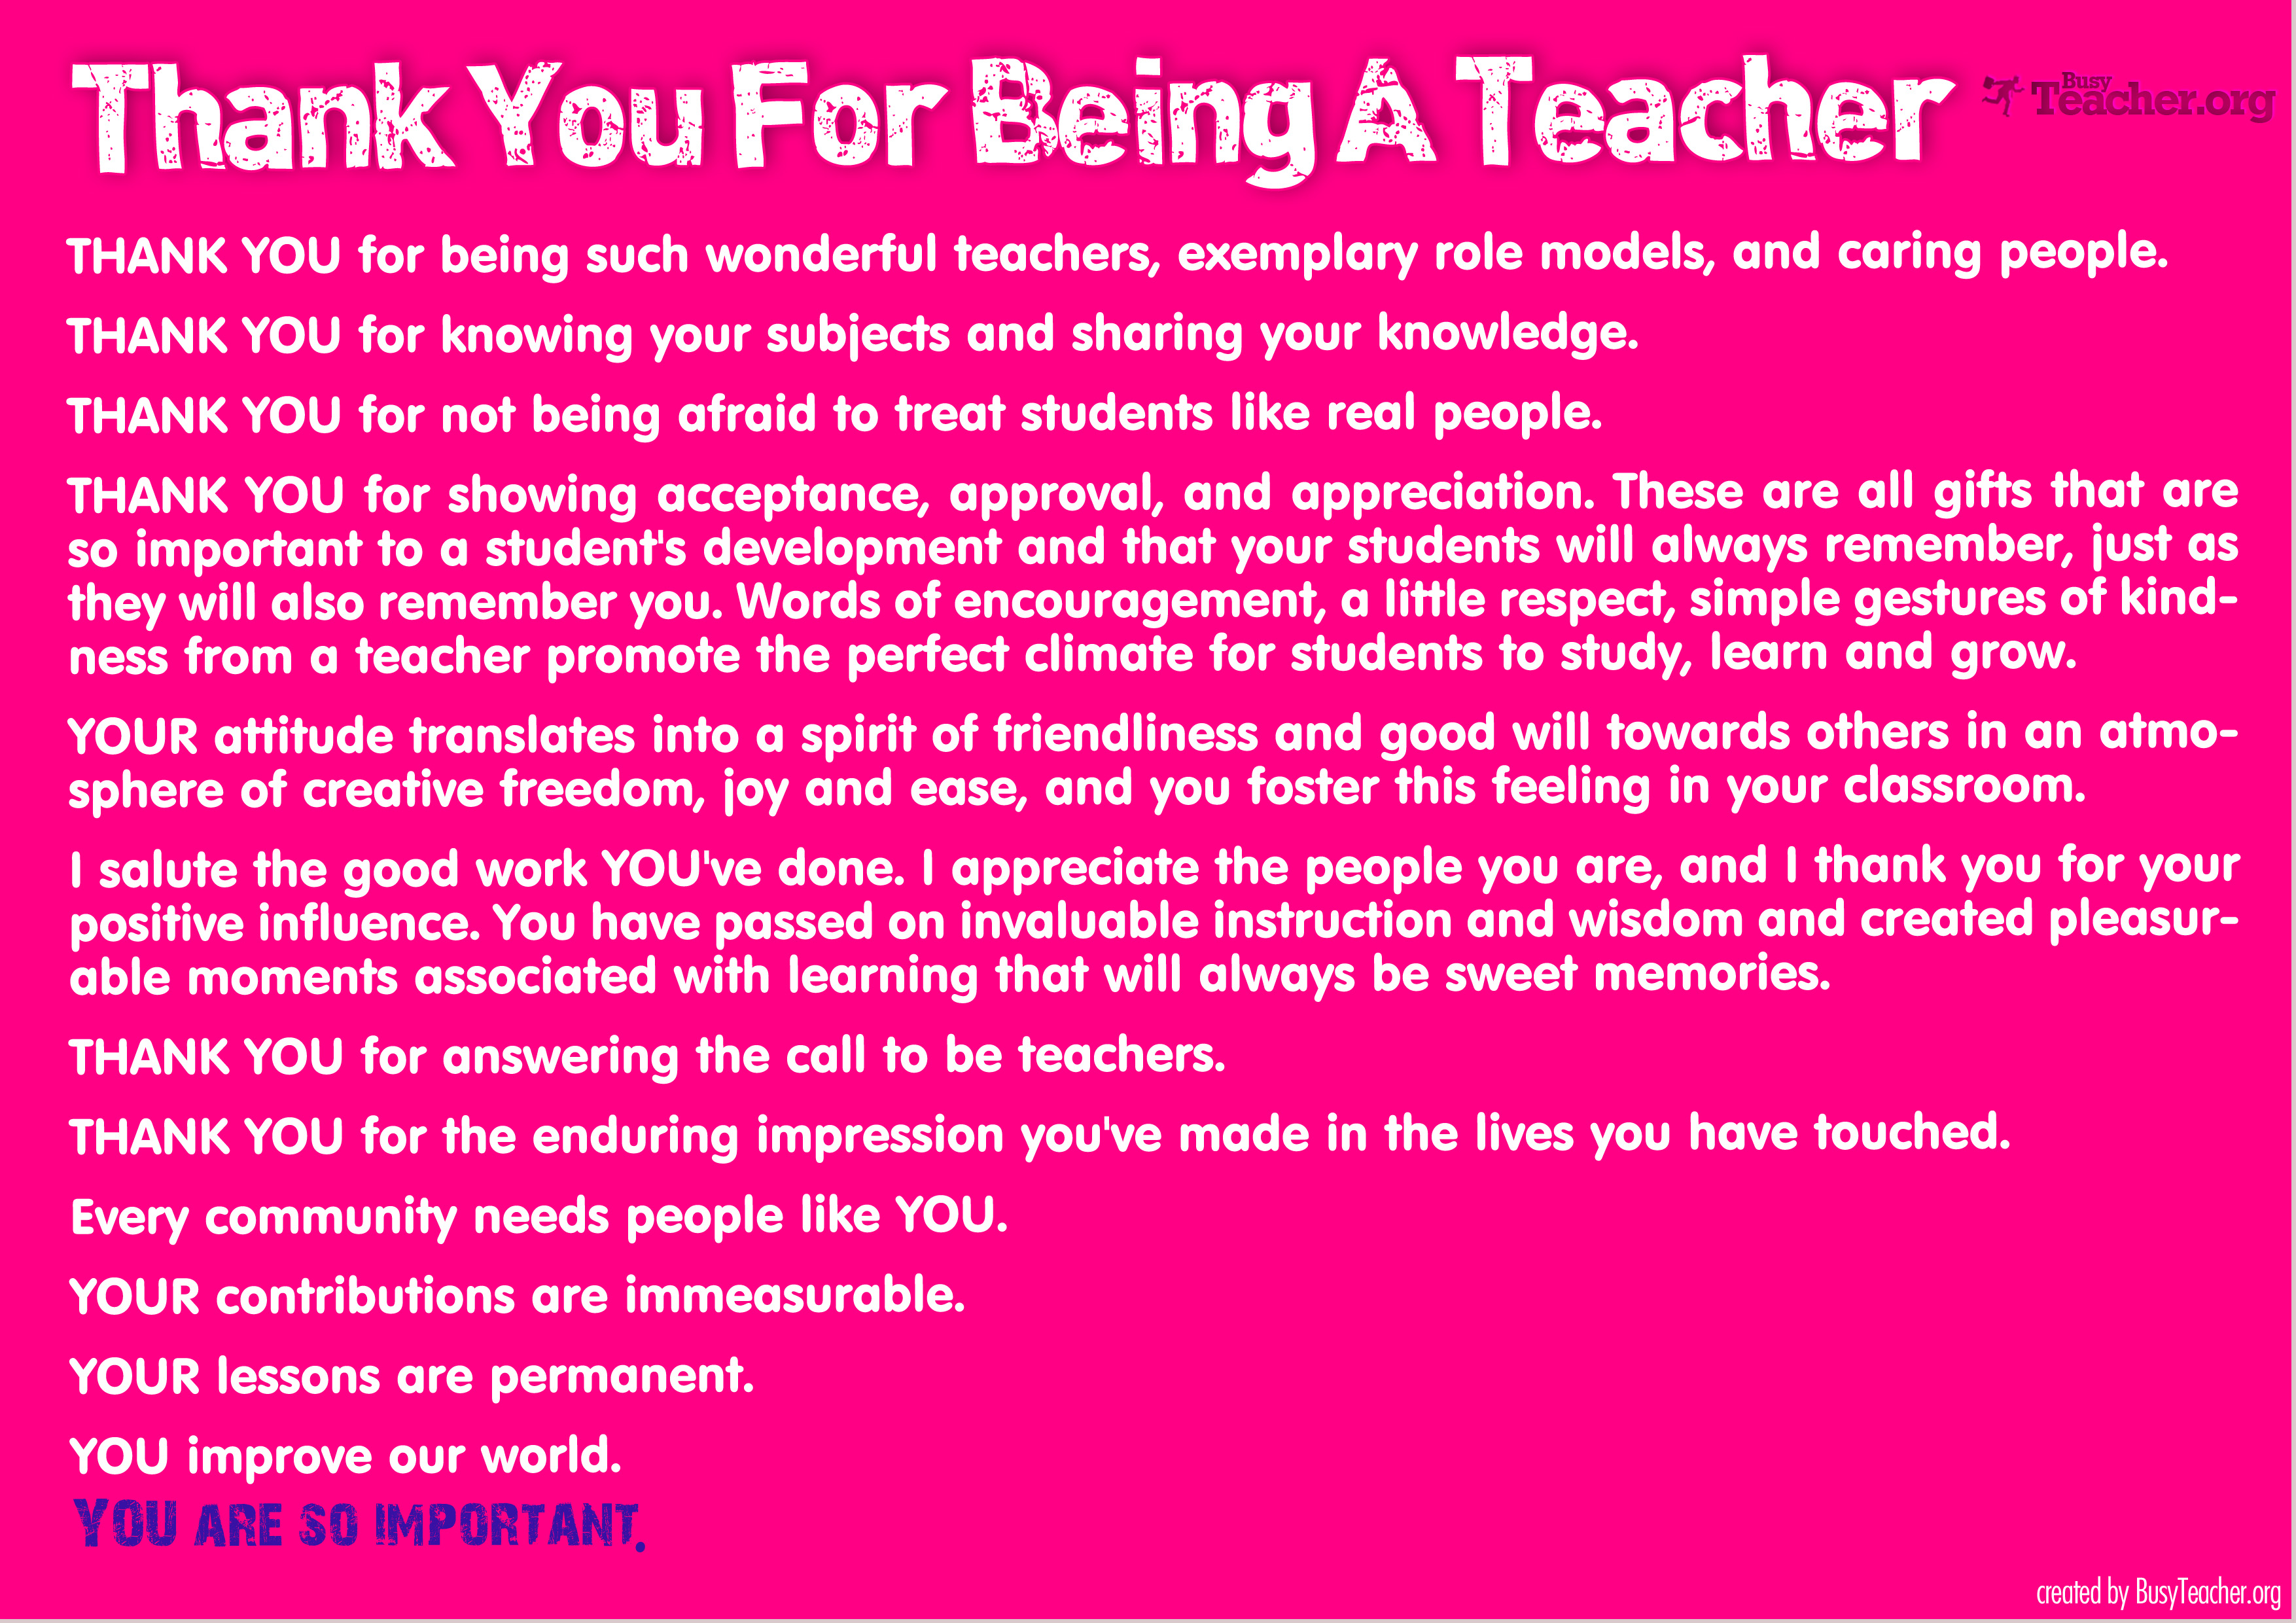 thank-you-for-being-a-teacher-poster